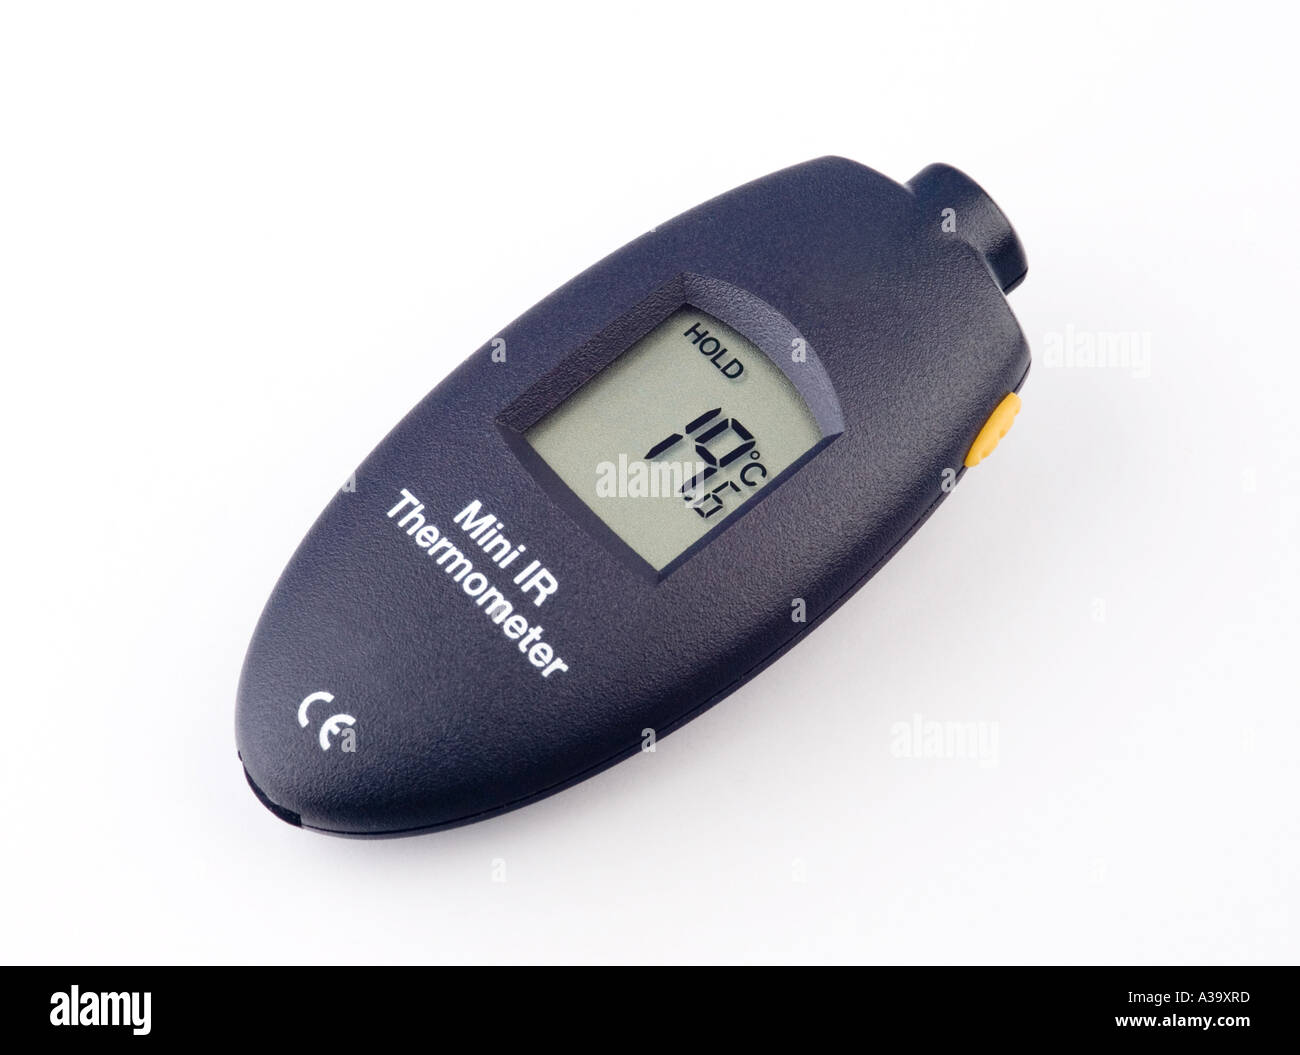 infra red thermometer Stock Photo